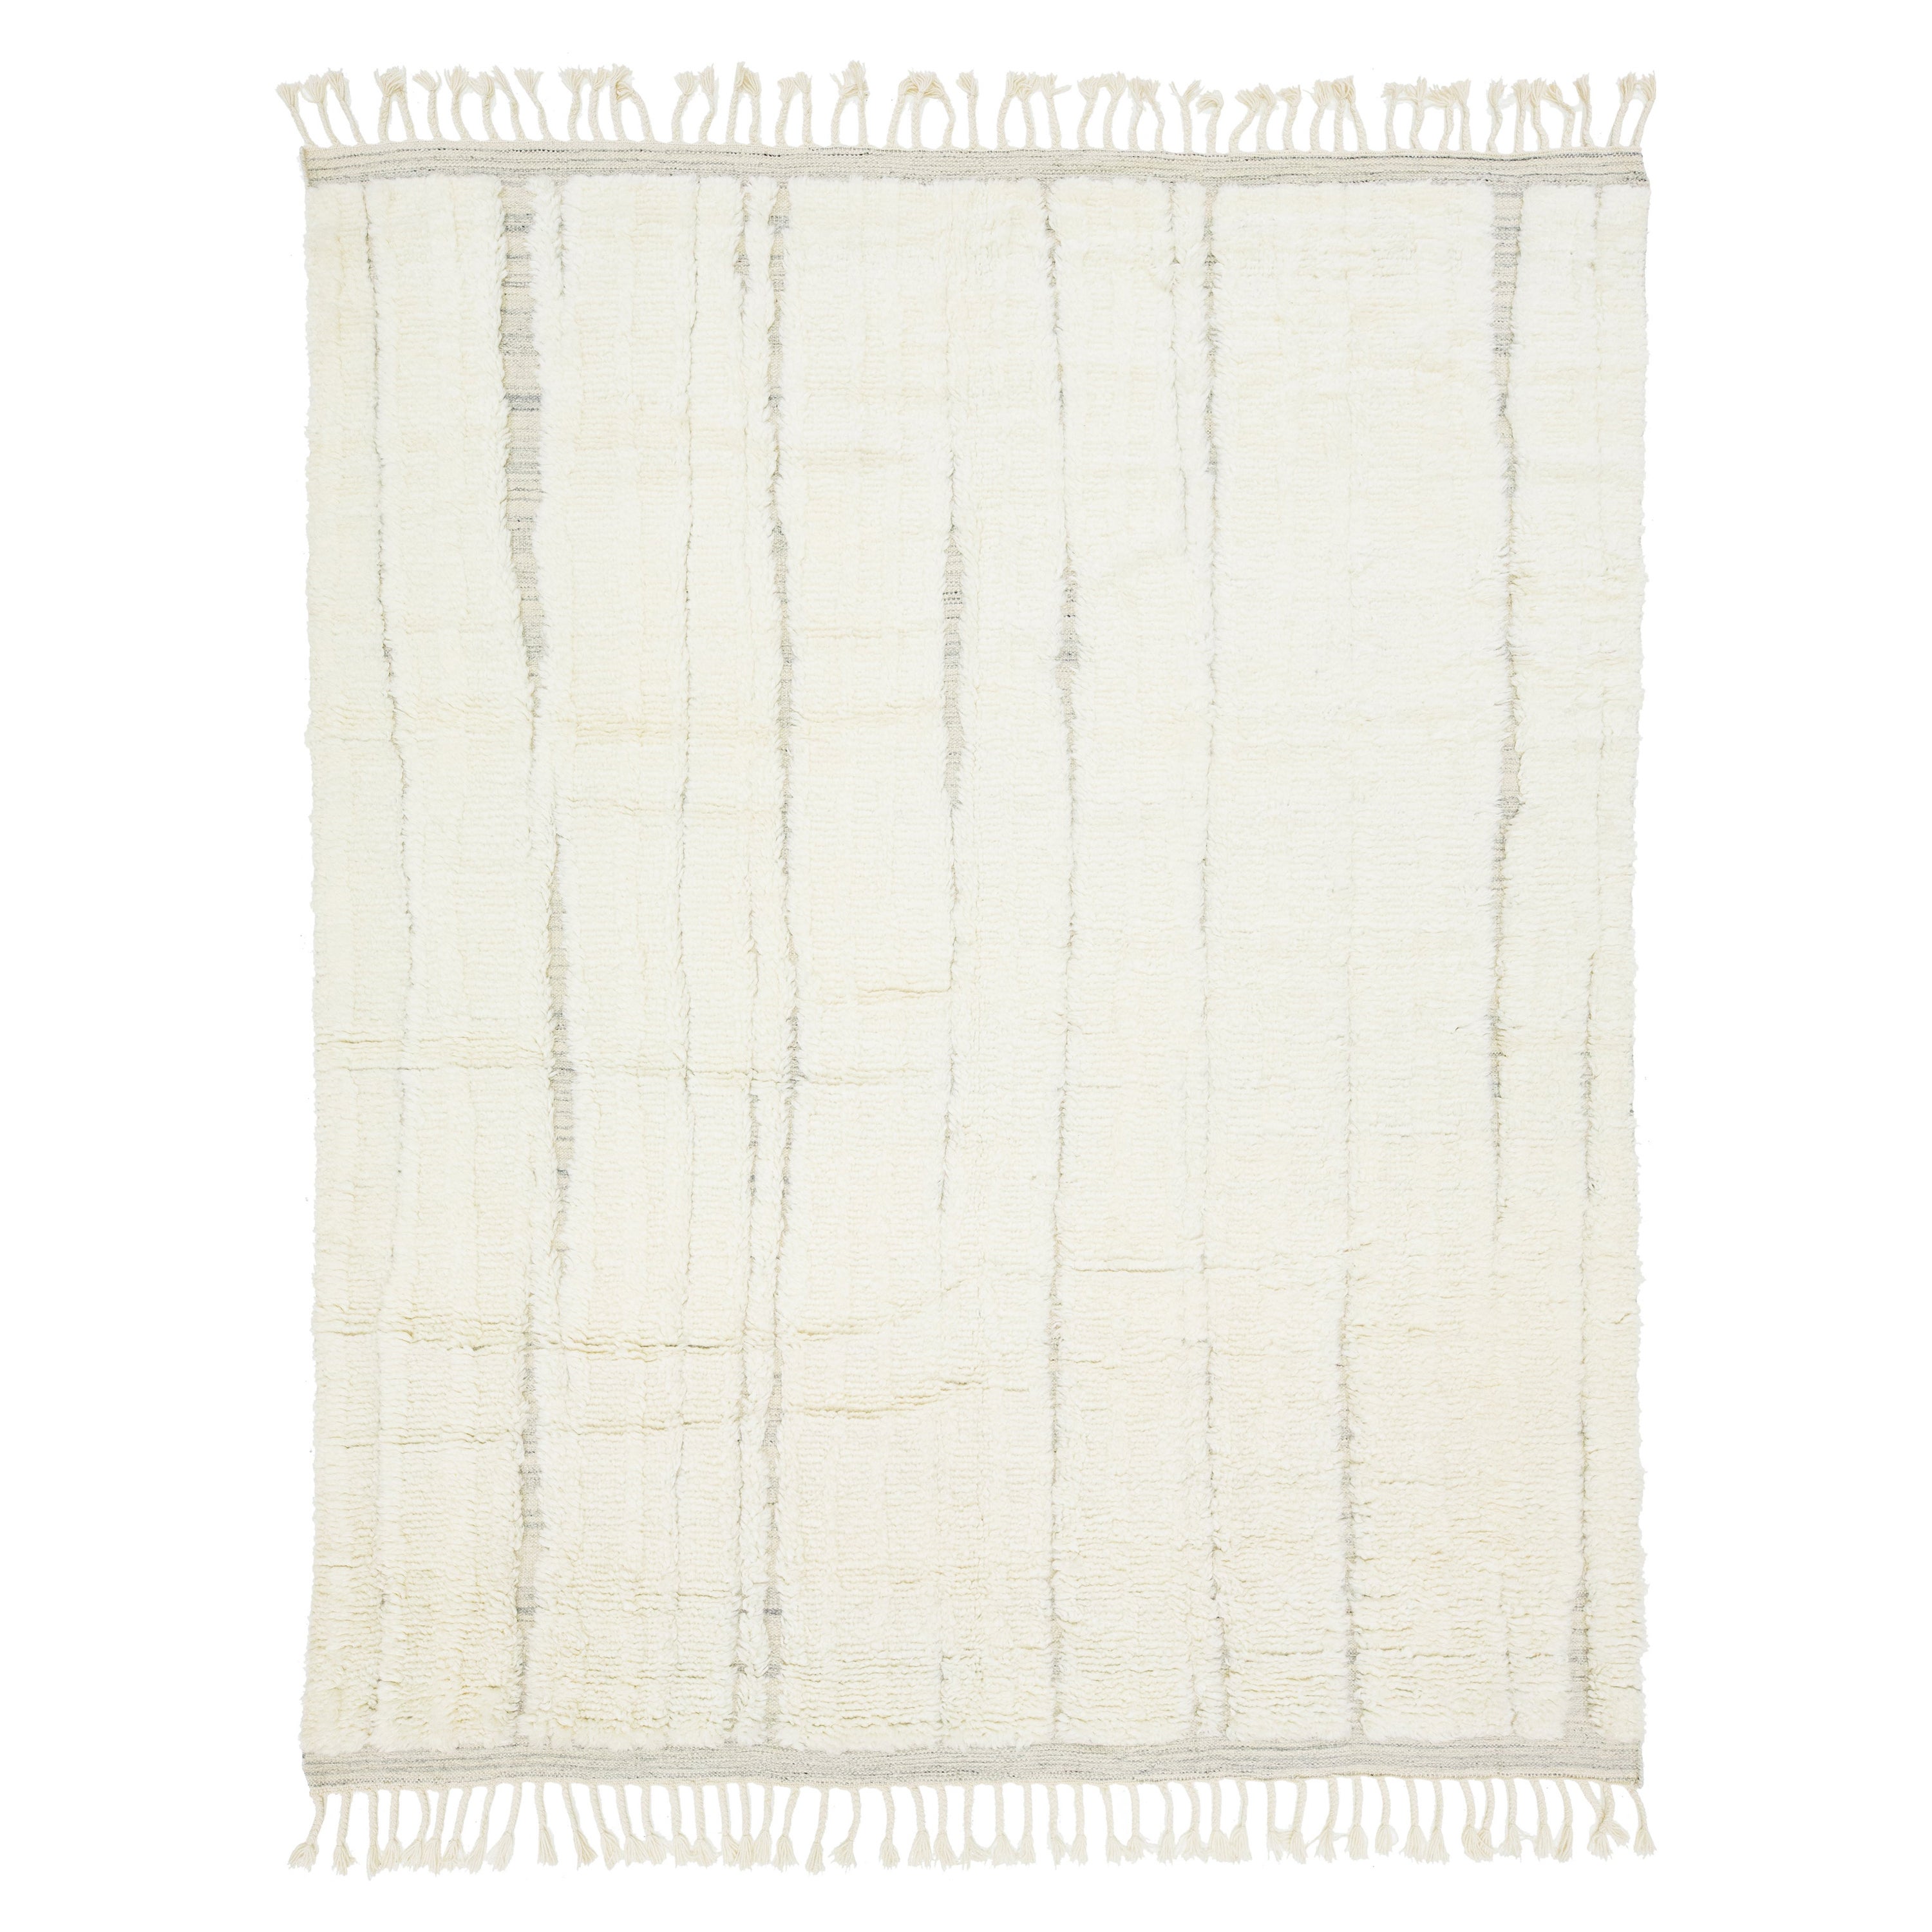 Contemporary Natural Handmade Moroccan-Style Wool Rug In Ivory by Apadana